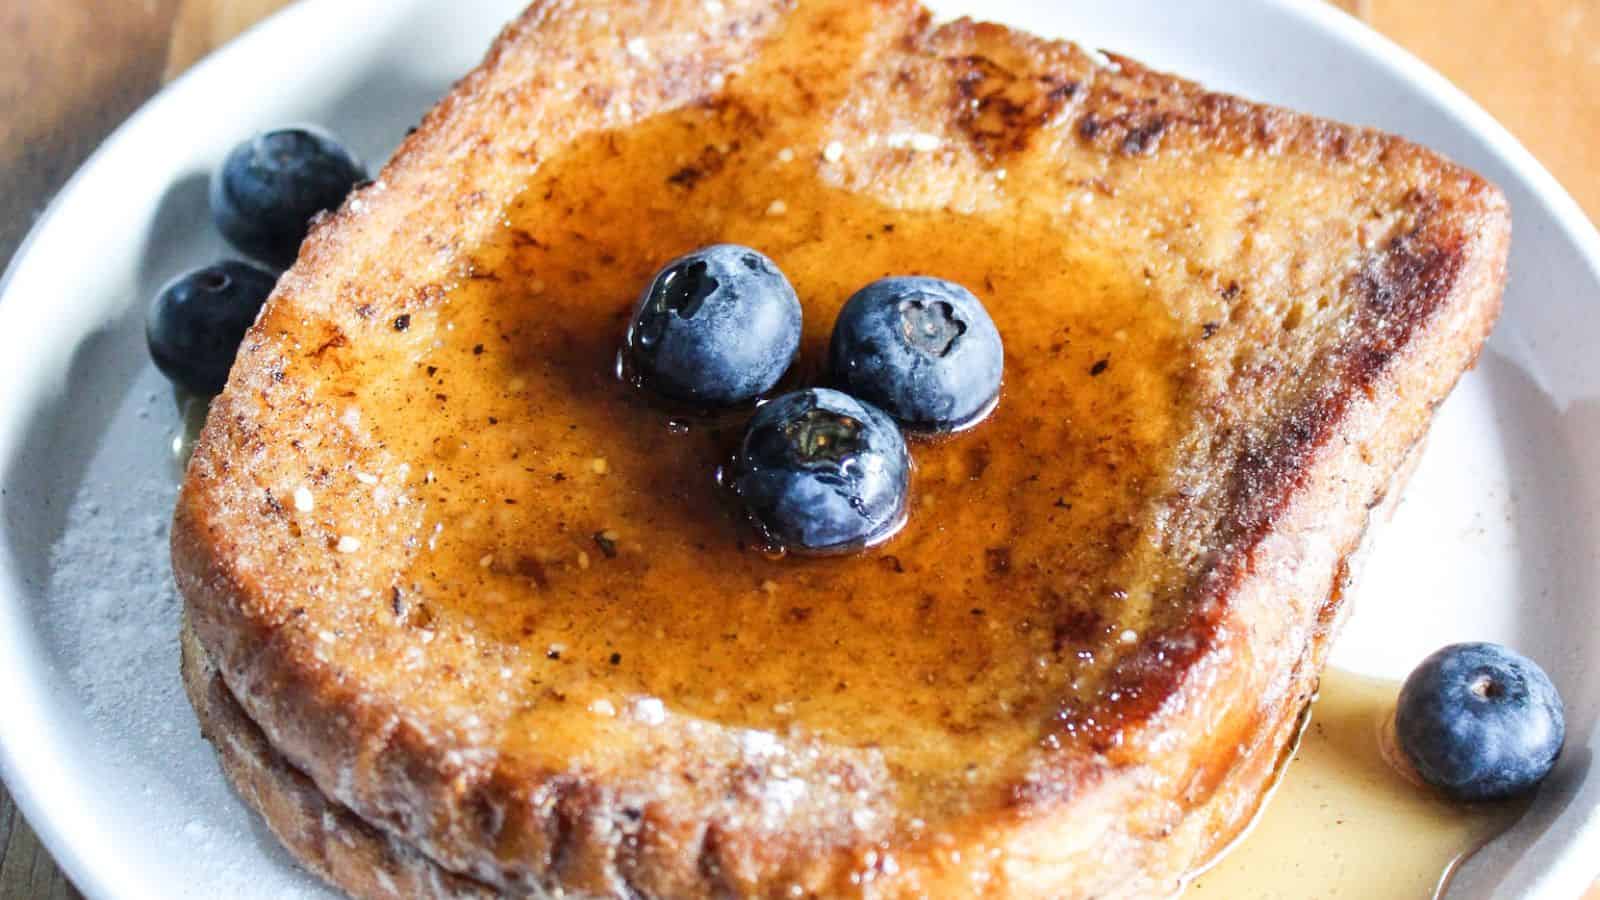 Air fryer french toast slices with syrup and blueberries on plate.